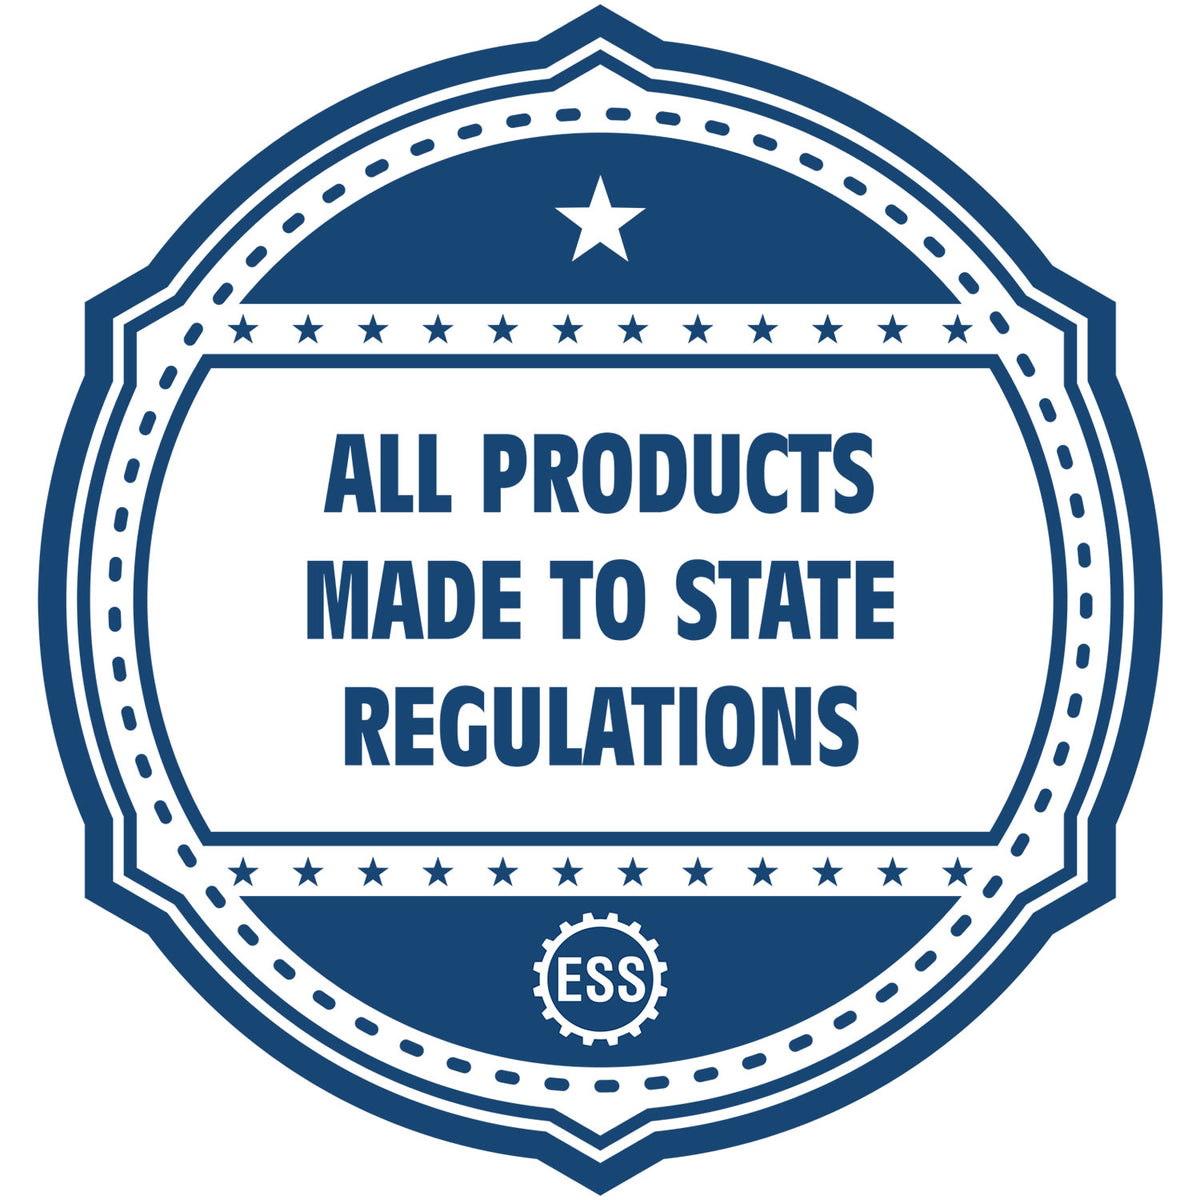 An icon or badge element for the Slim Pre-Inked Indiana Land Surveyor Seal Stamp showing that this product is made in compliance with state regulations.